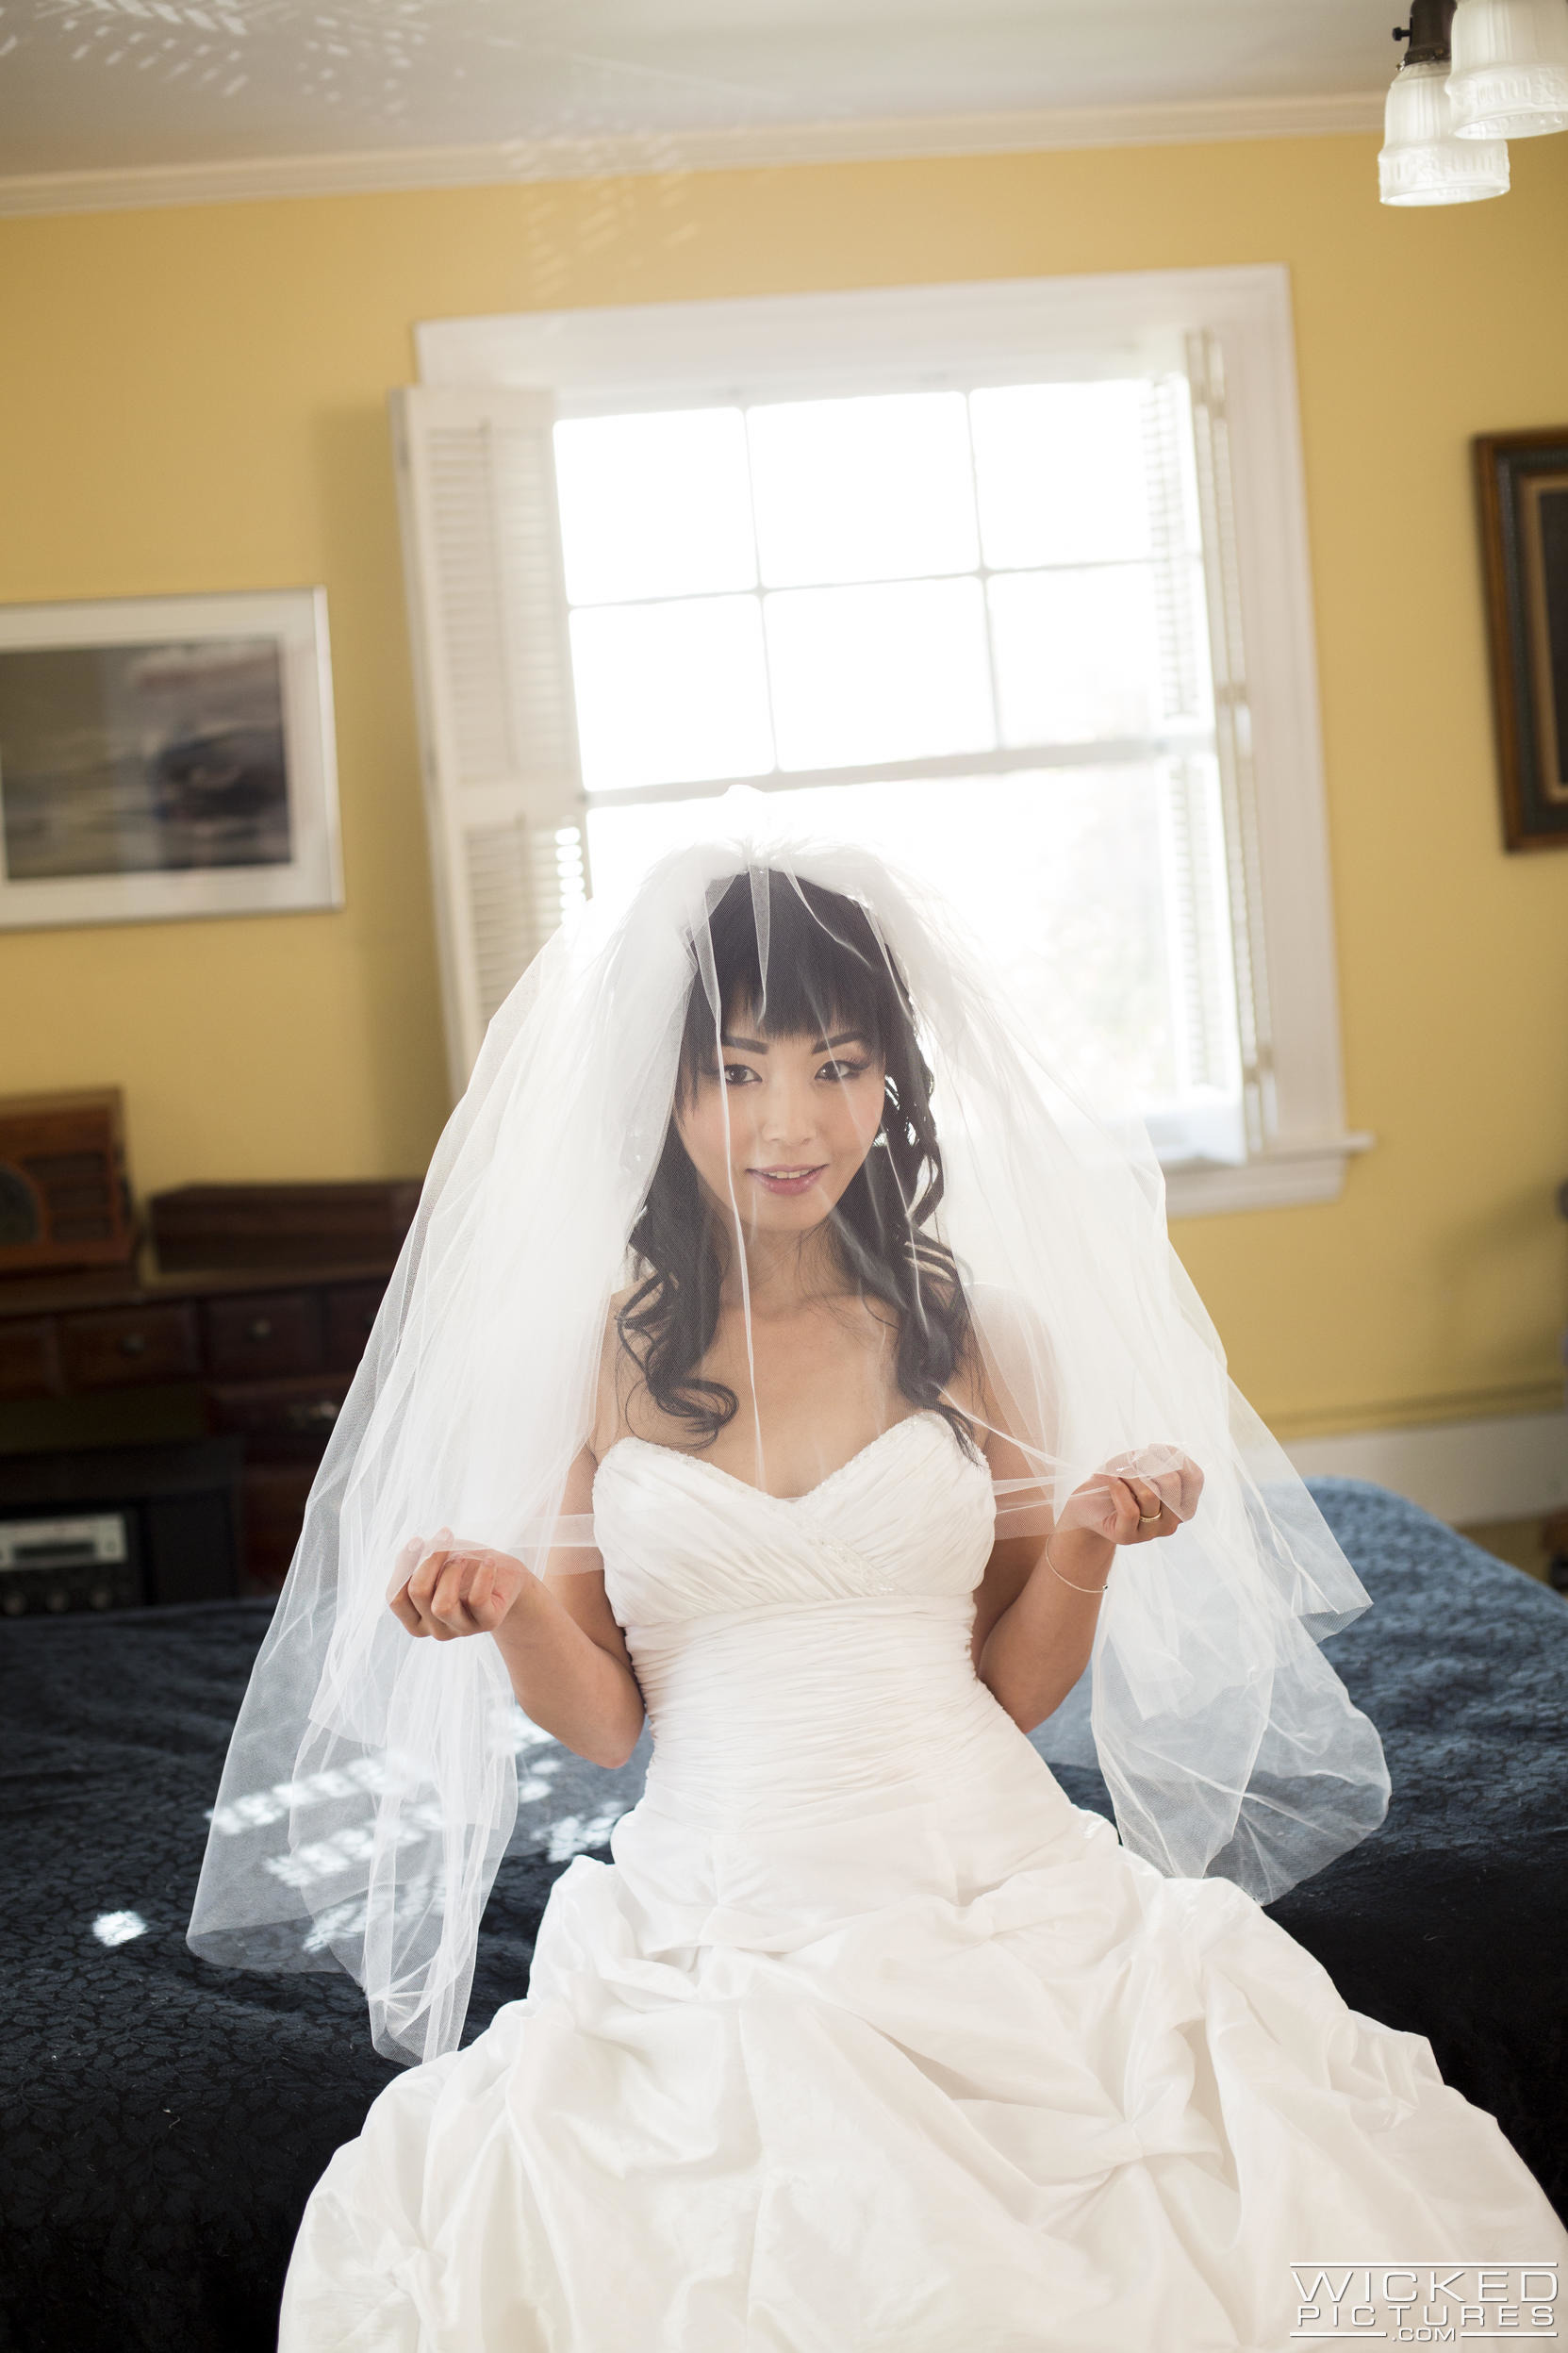 1663px x 2495px - Shaved Asian Bride Marica Hase Wearing Wedding Ring Giving Blowjob - Image  Gallery #281874